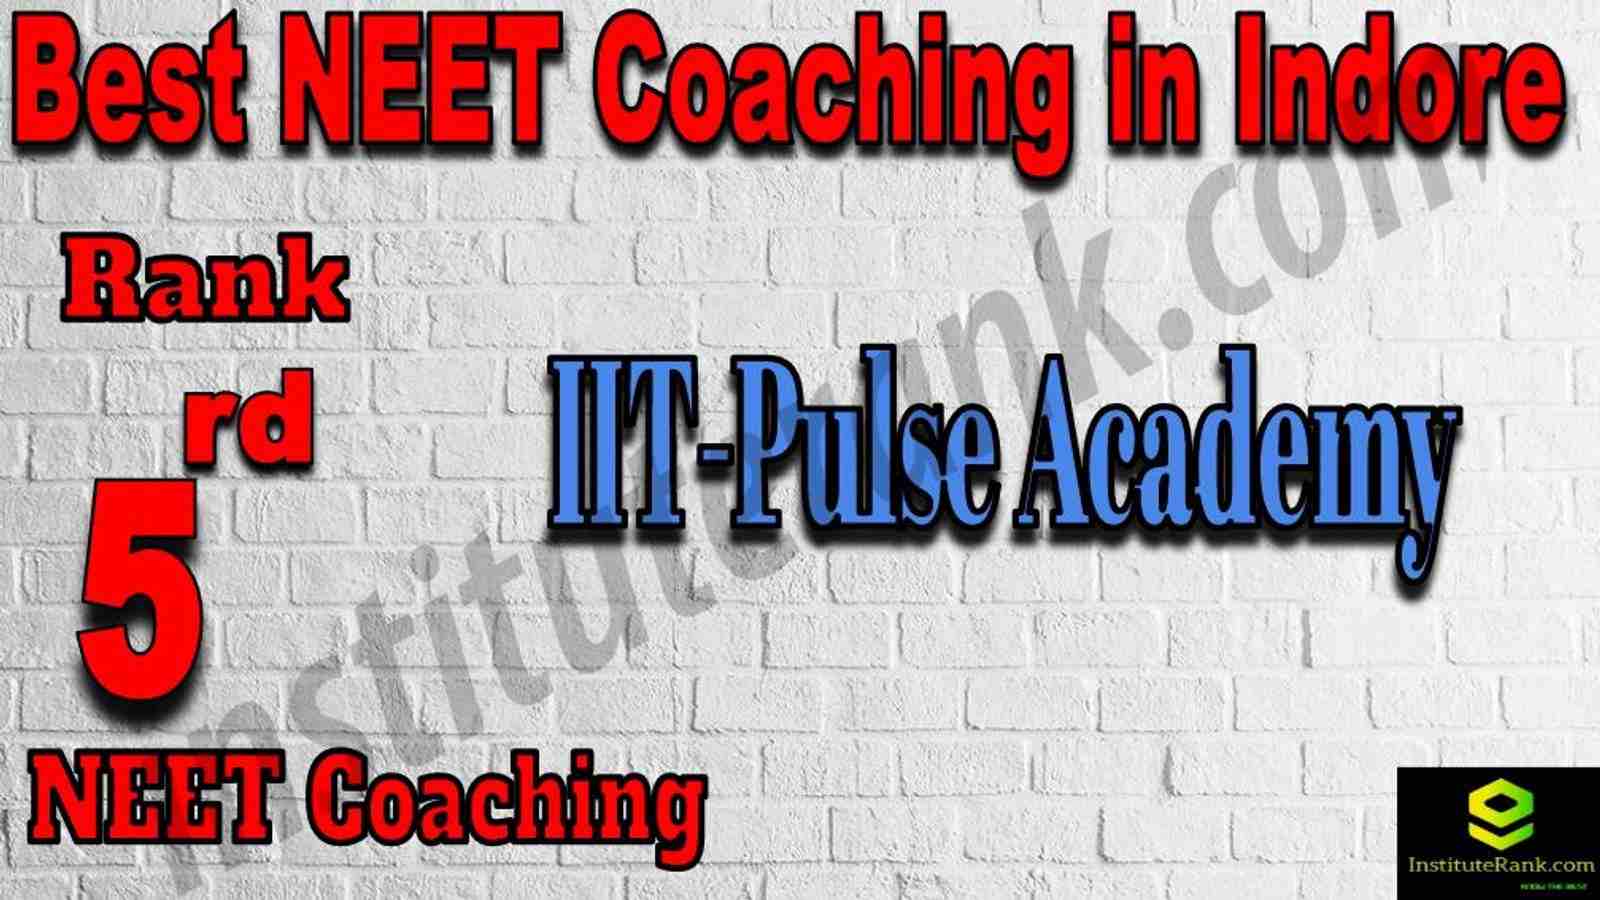 5th Best Neet Coaching in Indore